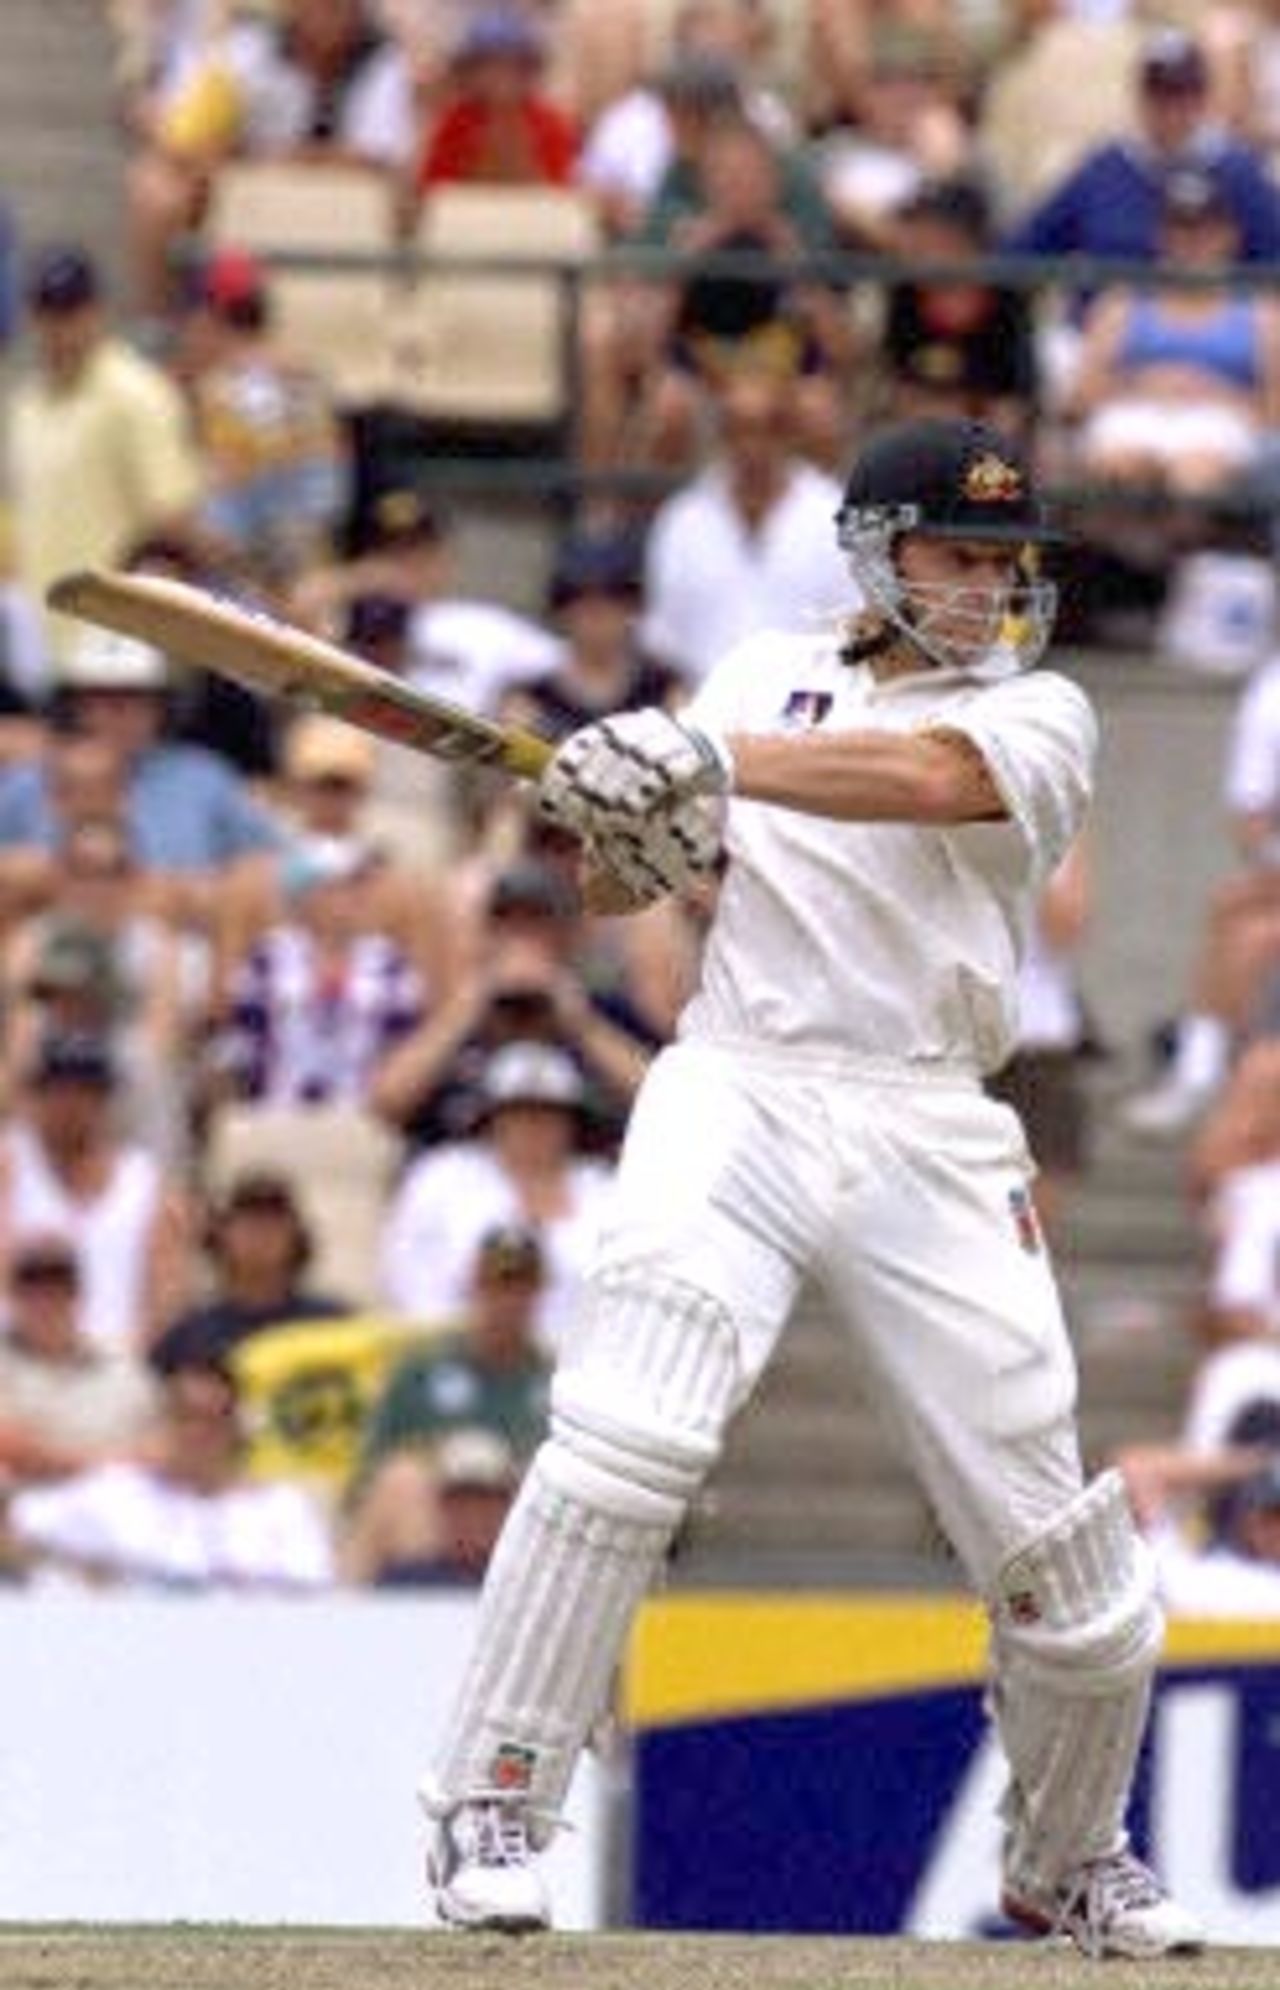 Australian left-handed batsman Adam Gilchrist slogs a four off the bowling off Courtney Walsh in the Federation test at the Sydney Cricket ground 04 January 2001. Australia is currently 5-356 with the West Indies making 272 in the first innings.